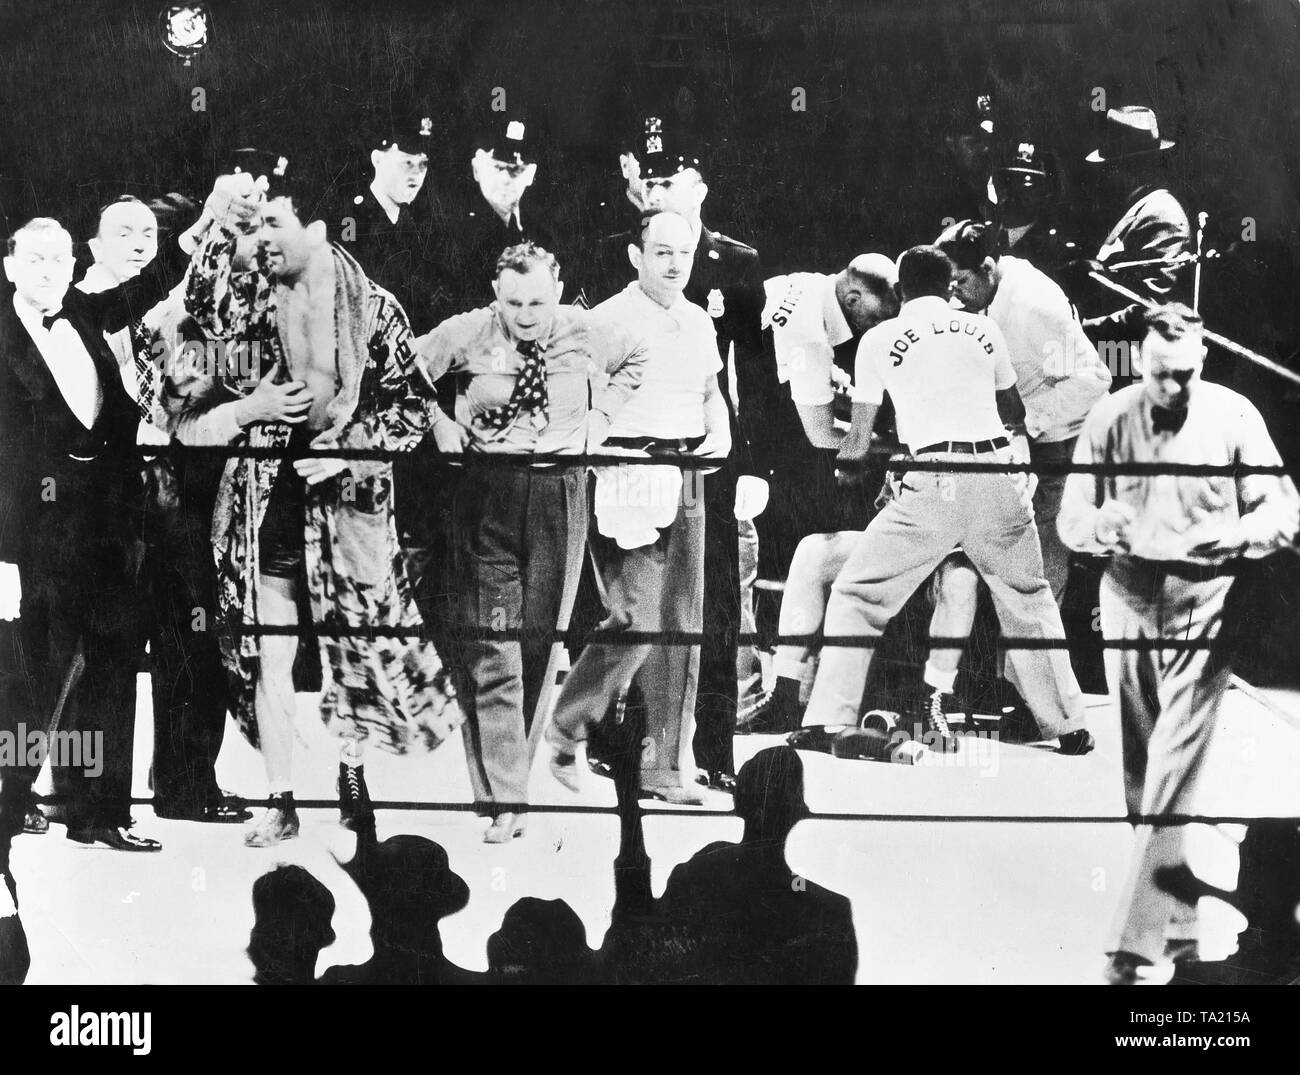 German boxer Max Schmeling (on the left) wins the world championship match against the American Joe Louis at the Yankee Stadium in New York on June 19. 1936. Scene from the Tobis documentary film 'A German victory' (Ein deutscher Sieg) Stock Photo